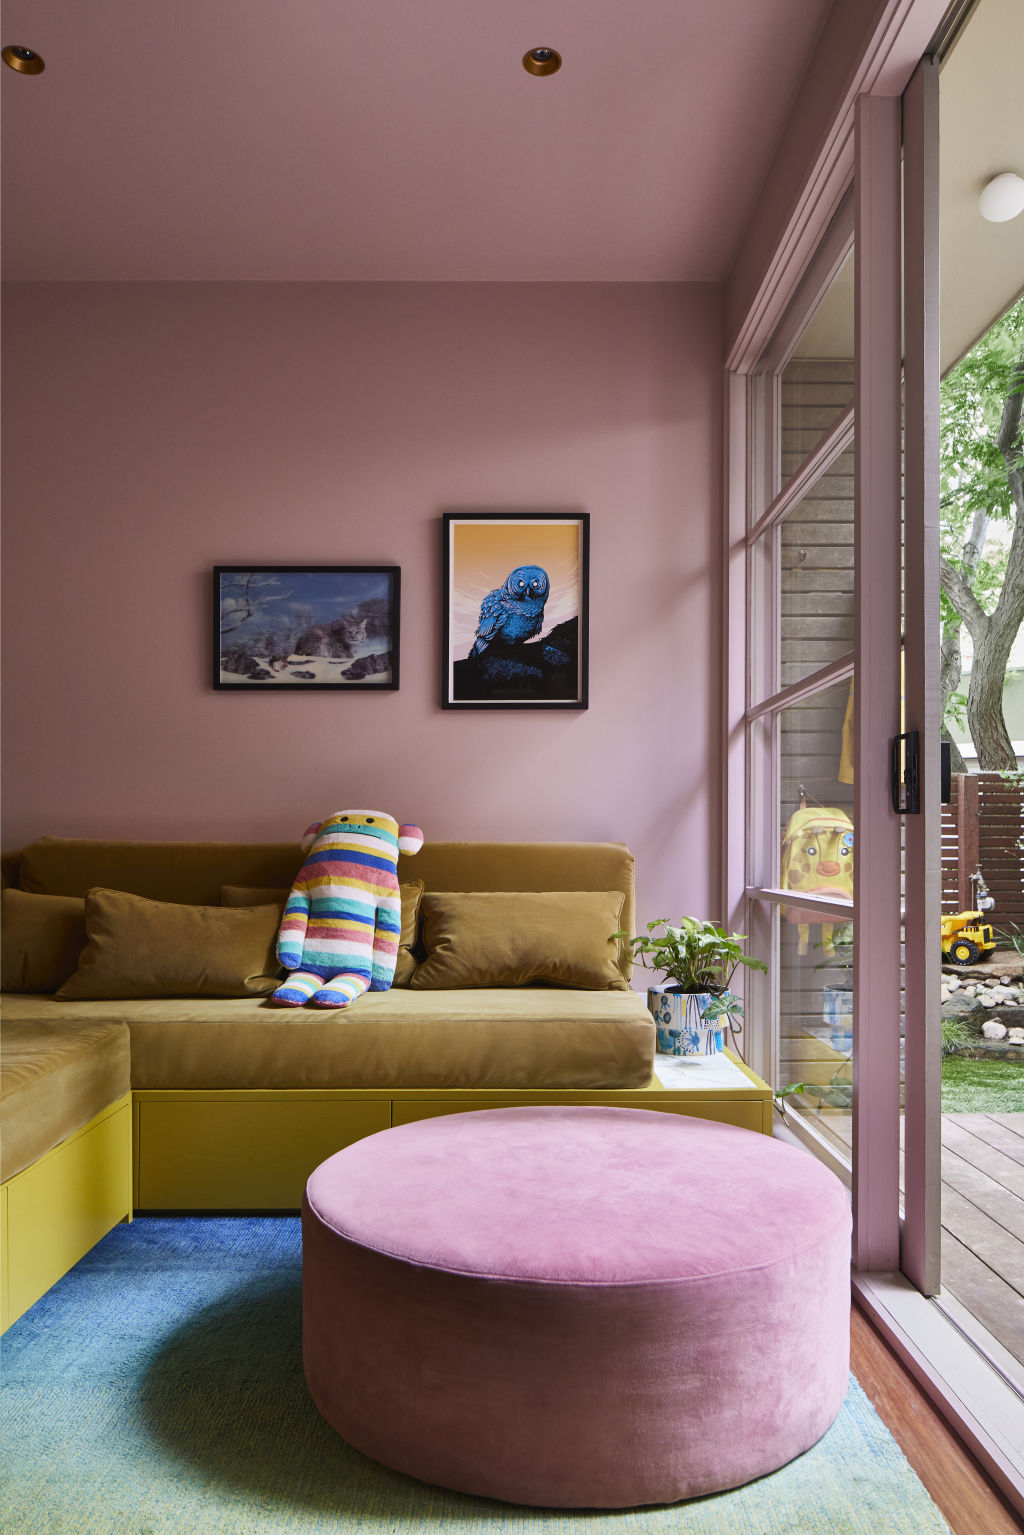 The former garage is now a colourful second living space. Photo: Armelle Habib